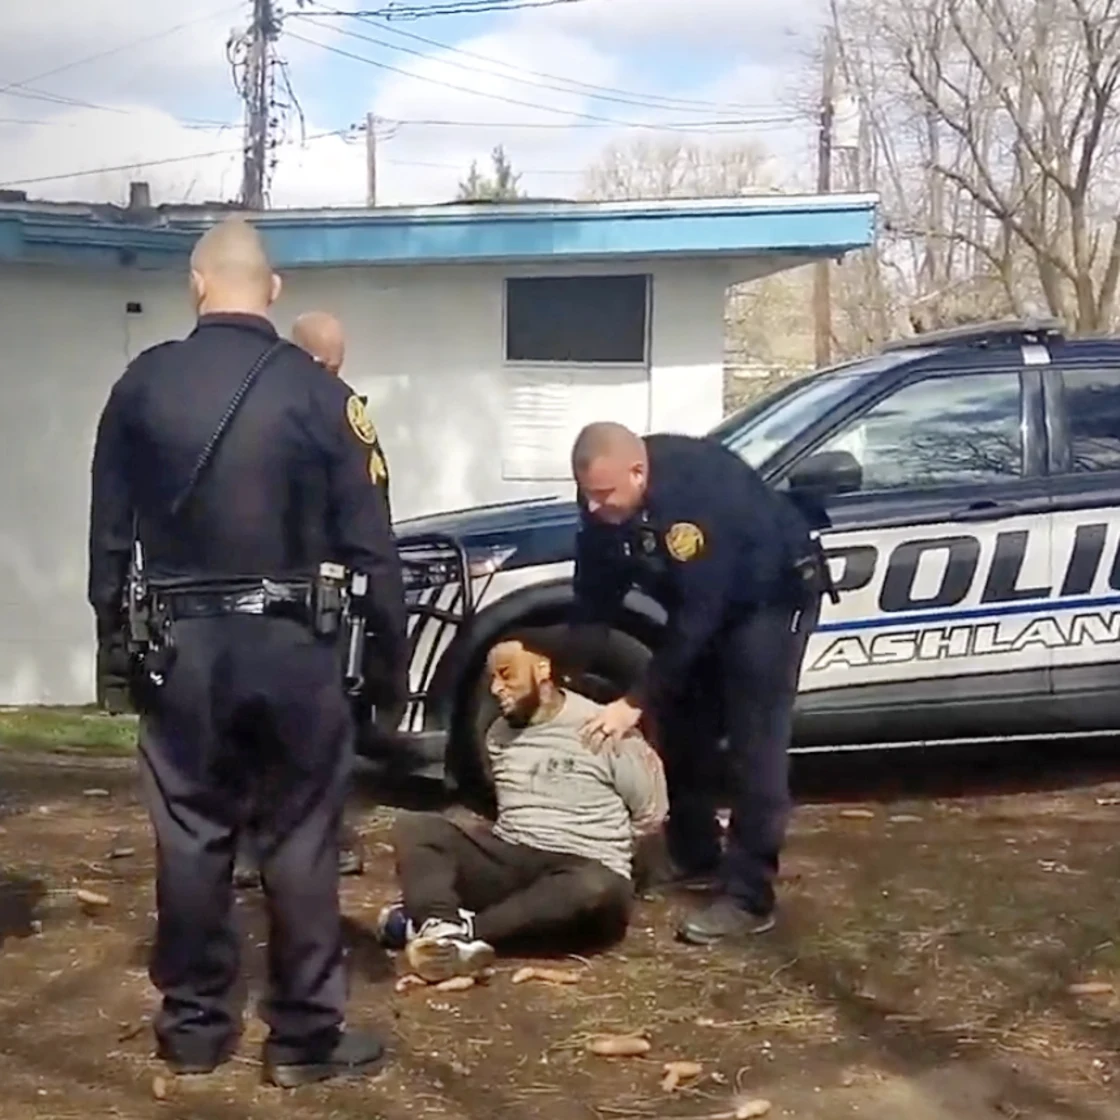 Video shows police in Kentucky were asked toget medical care for man who died in custody